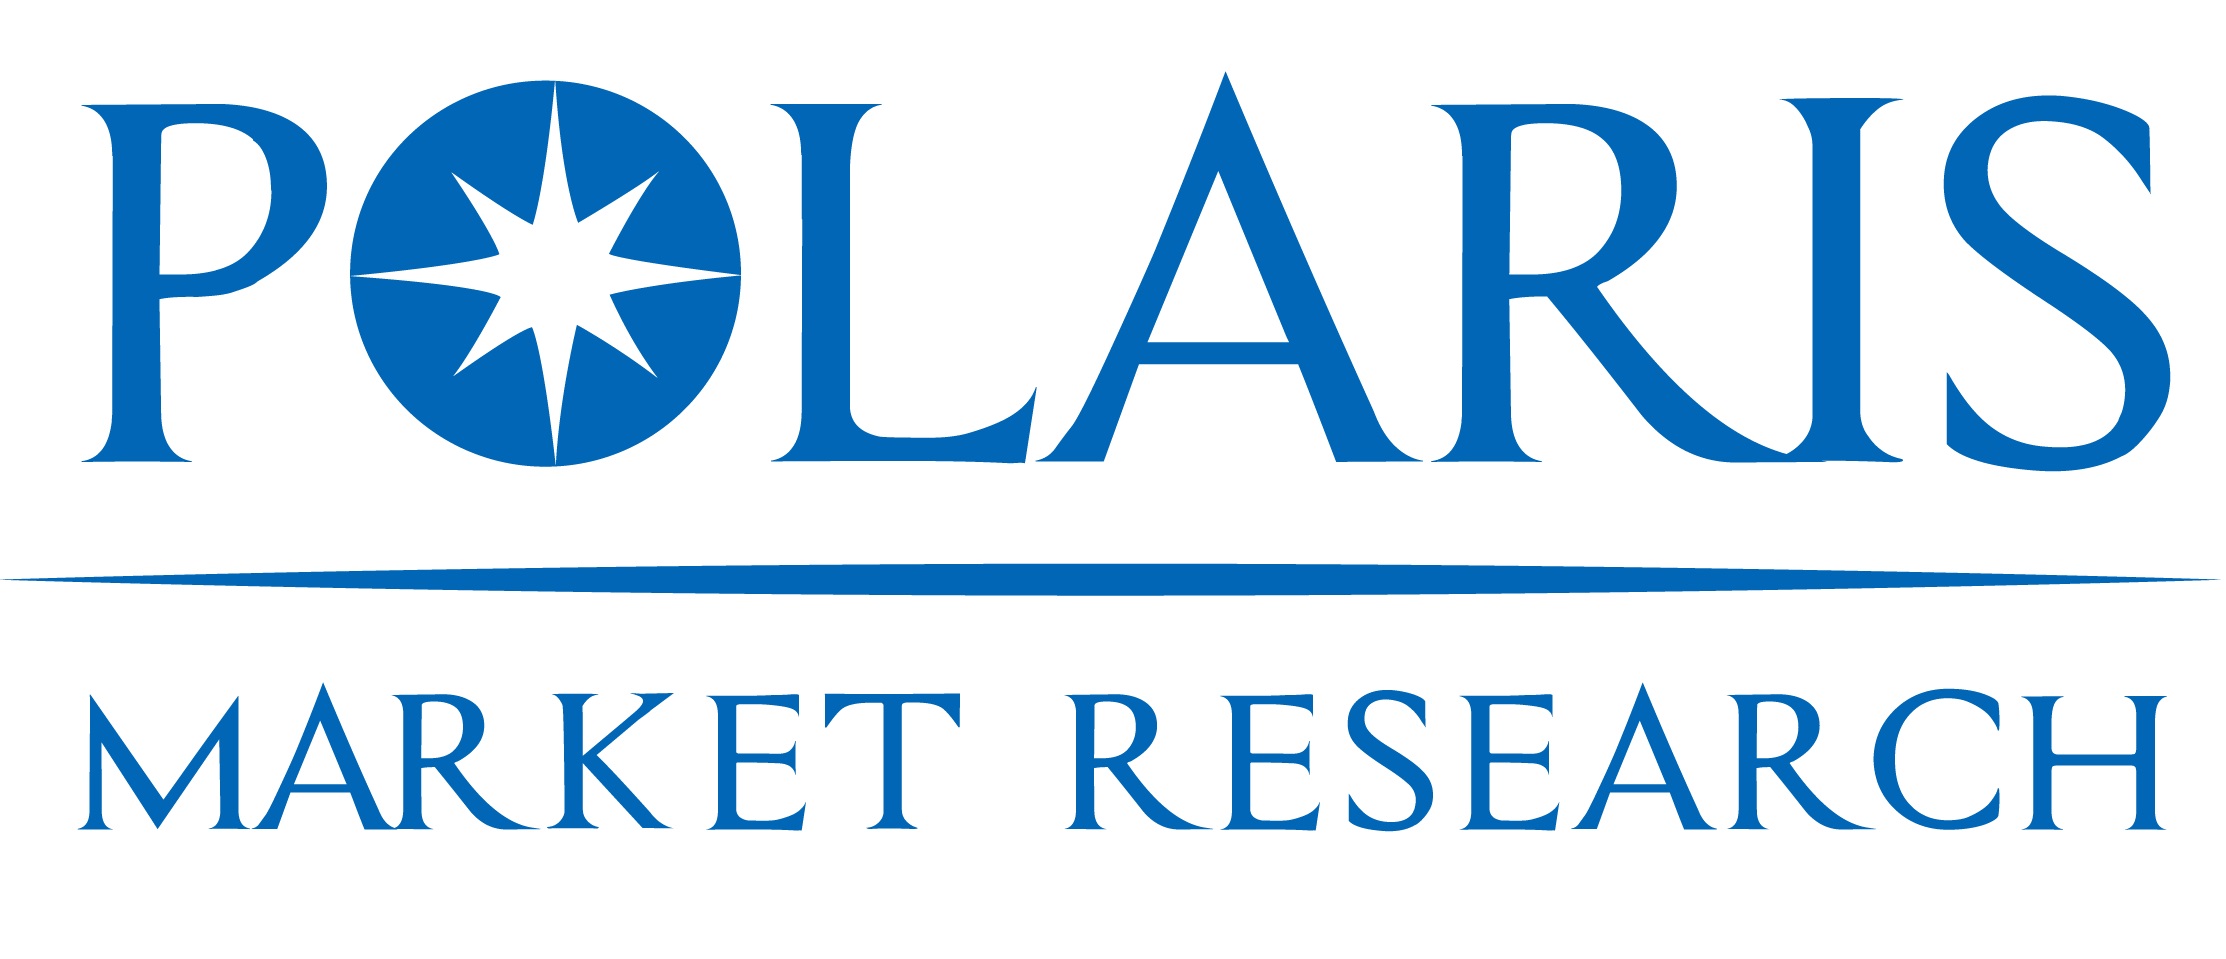 Global EdTech and Smart Classroom Market Share is expected 16.4% CAGR Rise, Will Reach to $277.21 Billion Globally by 2028 (with COVID-19 Analysis): Polaris Market Research